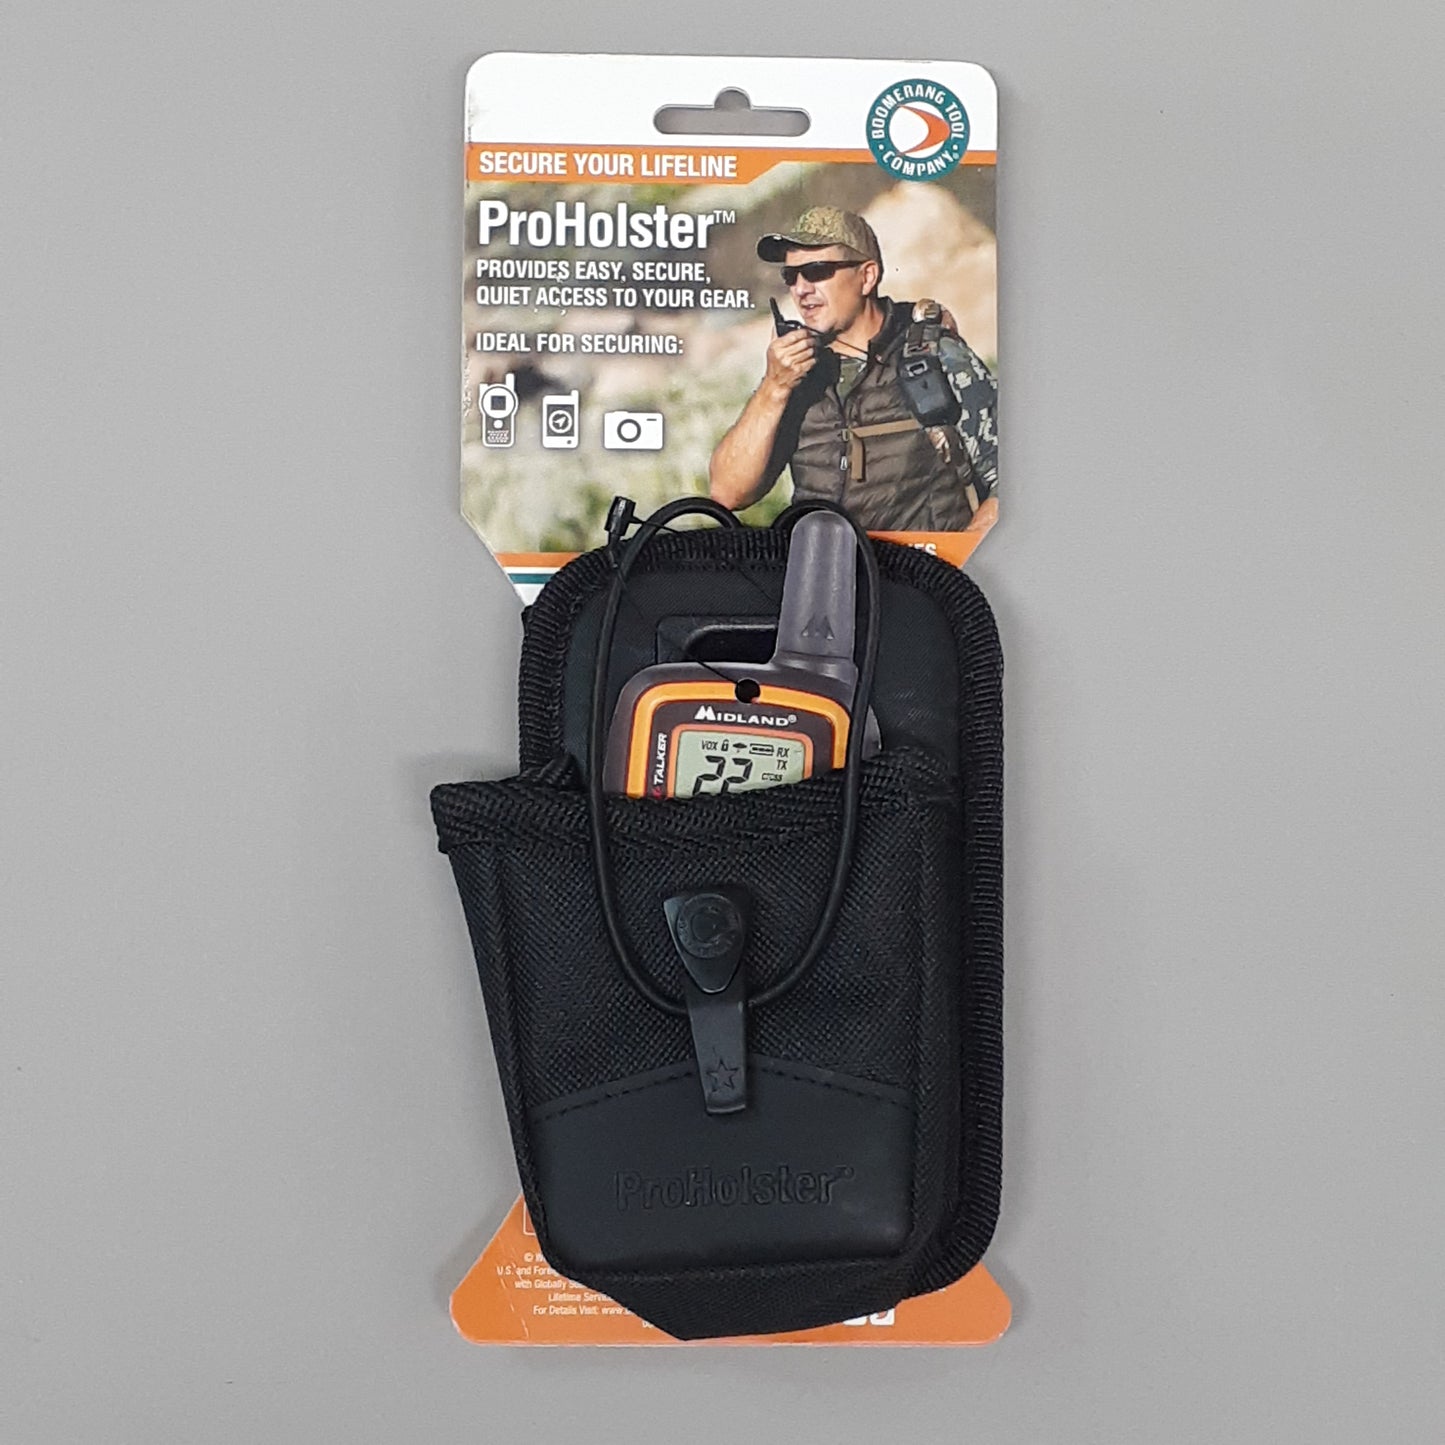 PROHOLSTER Electronics Protective Holster for Radios and Handheld GPS (New)